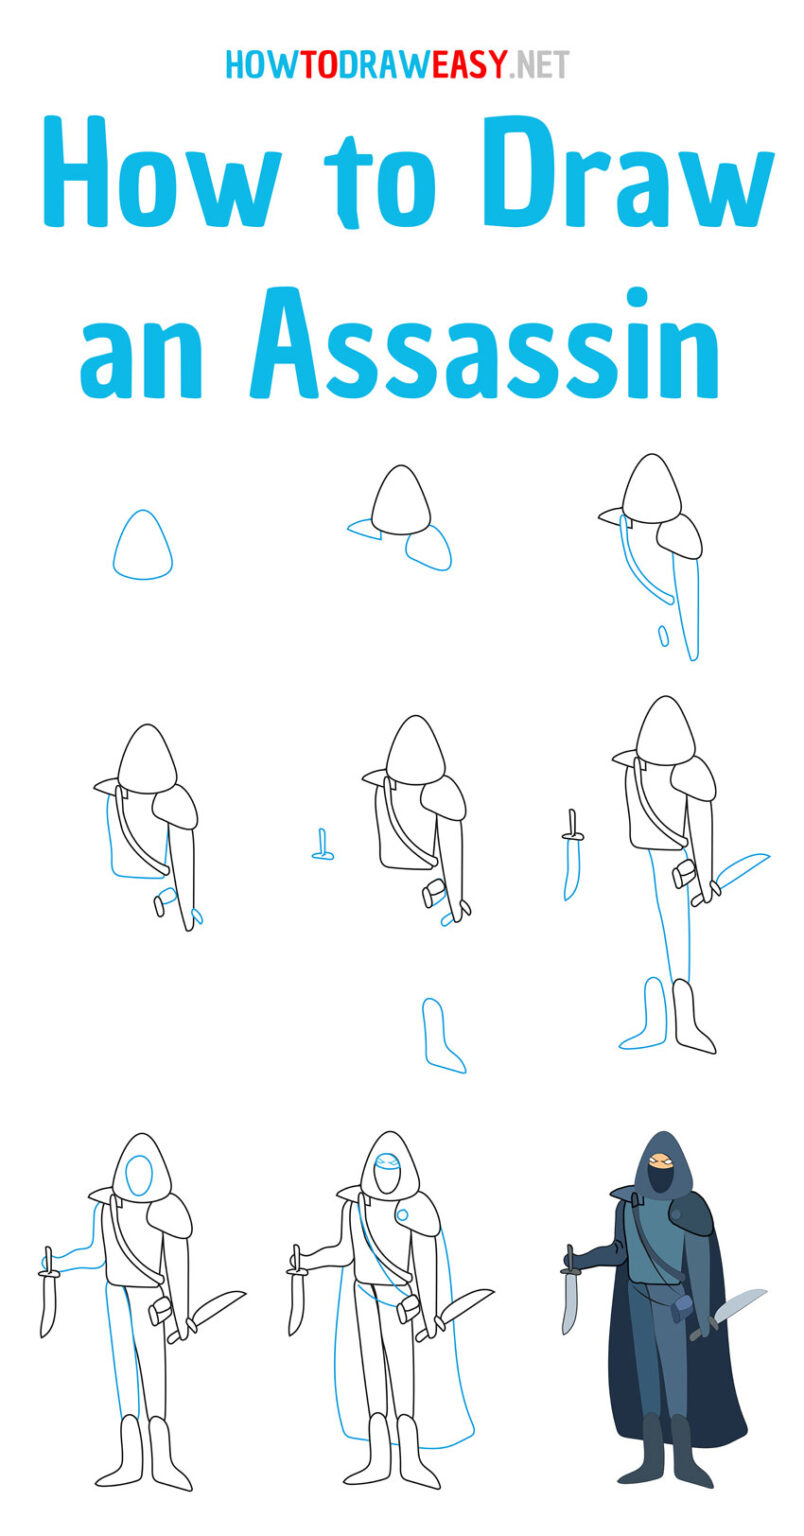 How to Draw an Assassin - How to Draw Easy